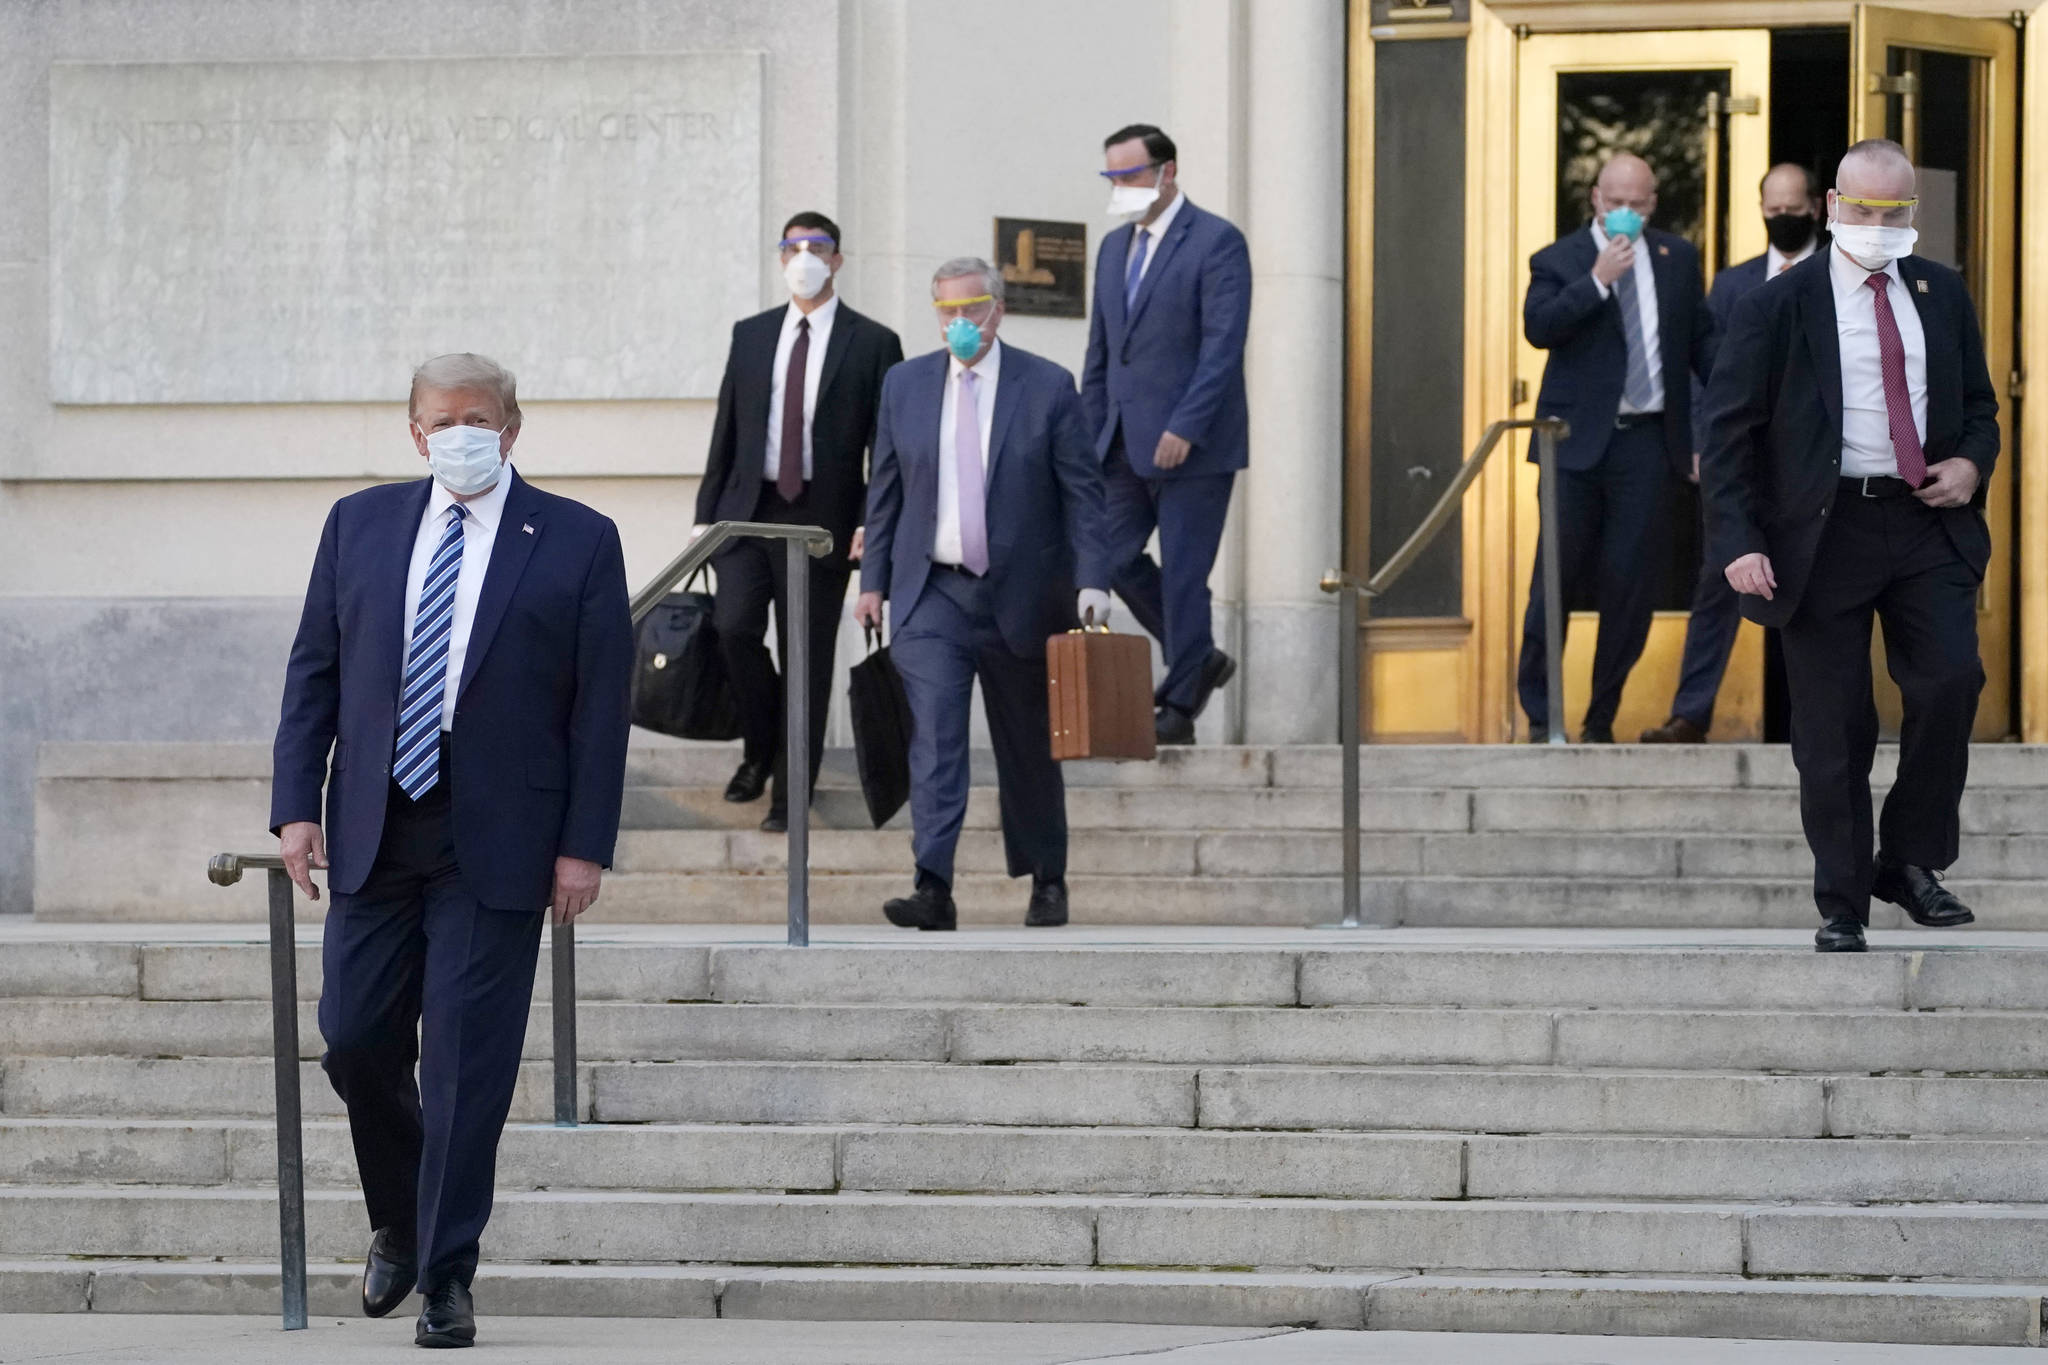 AP Photo / Evan Vucci President Donald Trump (left) walks out of Walter Reed National Military Medical Center on Monday to return to the White House after receiving treatments for covid-19 at the Walter Reed Medical Center in Bethesda, Maryland.